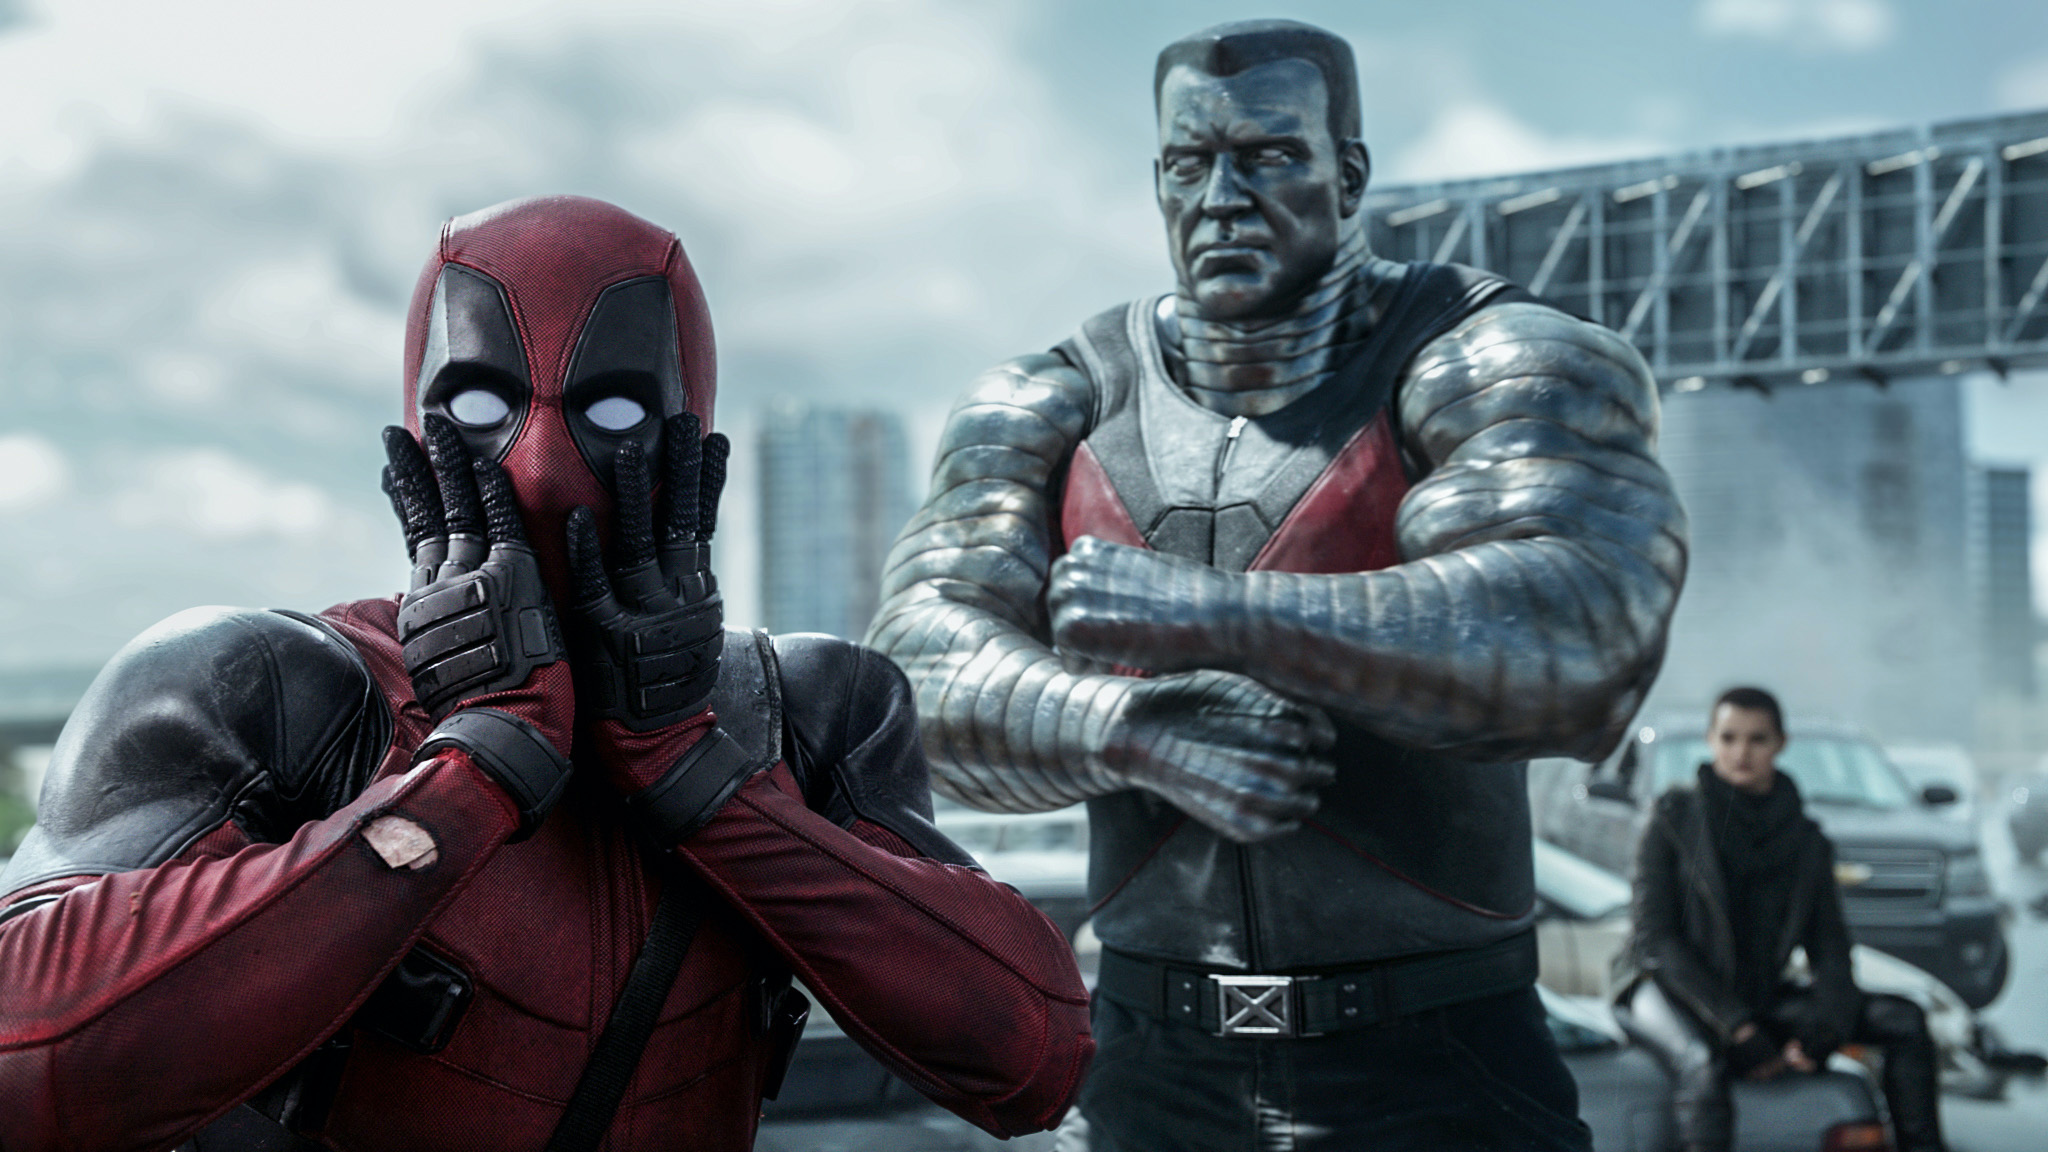 Deadpool 3: They’re Still Figuring Out How To Move Forward At Marvel Studios, Says Ryan Reynolds